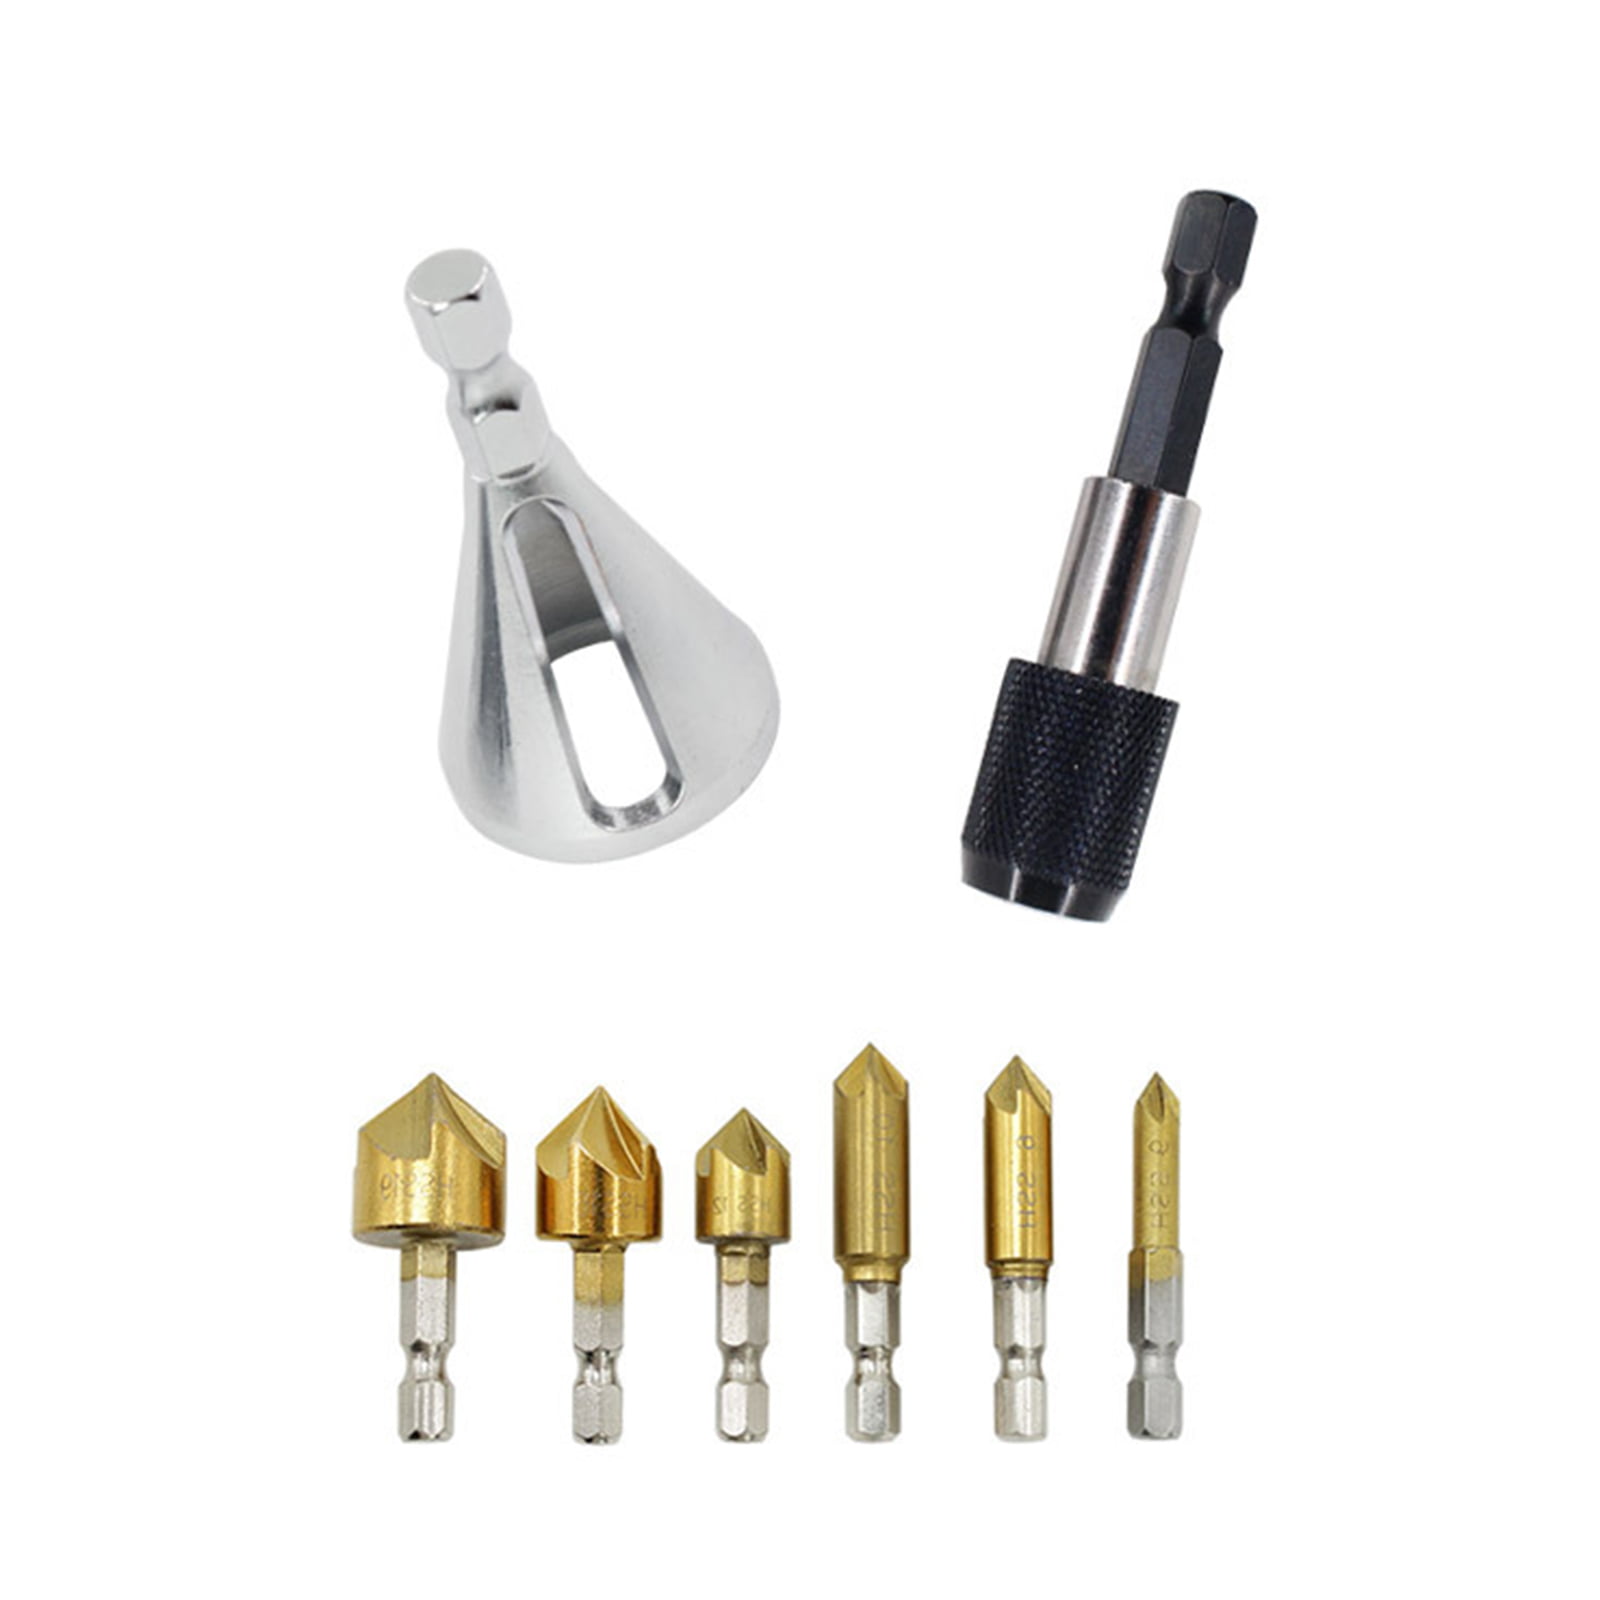 6pcs Countersink Drill Bit 90 Degree Center Punch Tool Sets For Wood Quick Change Bit 4 piece Deburring Metal Wood Drill Bit set Deburring External Chamfer Tool Stainless Steel Remove Burr Tools 